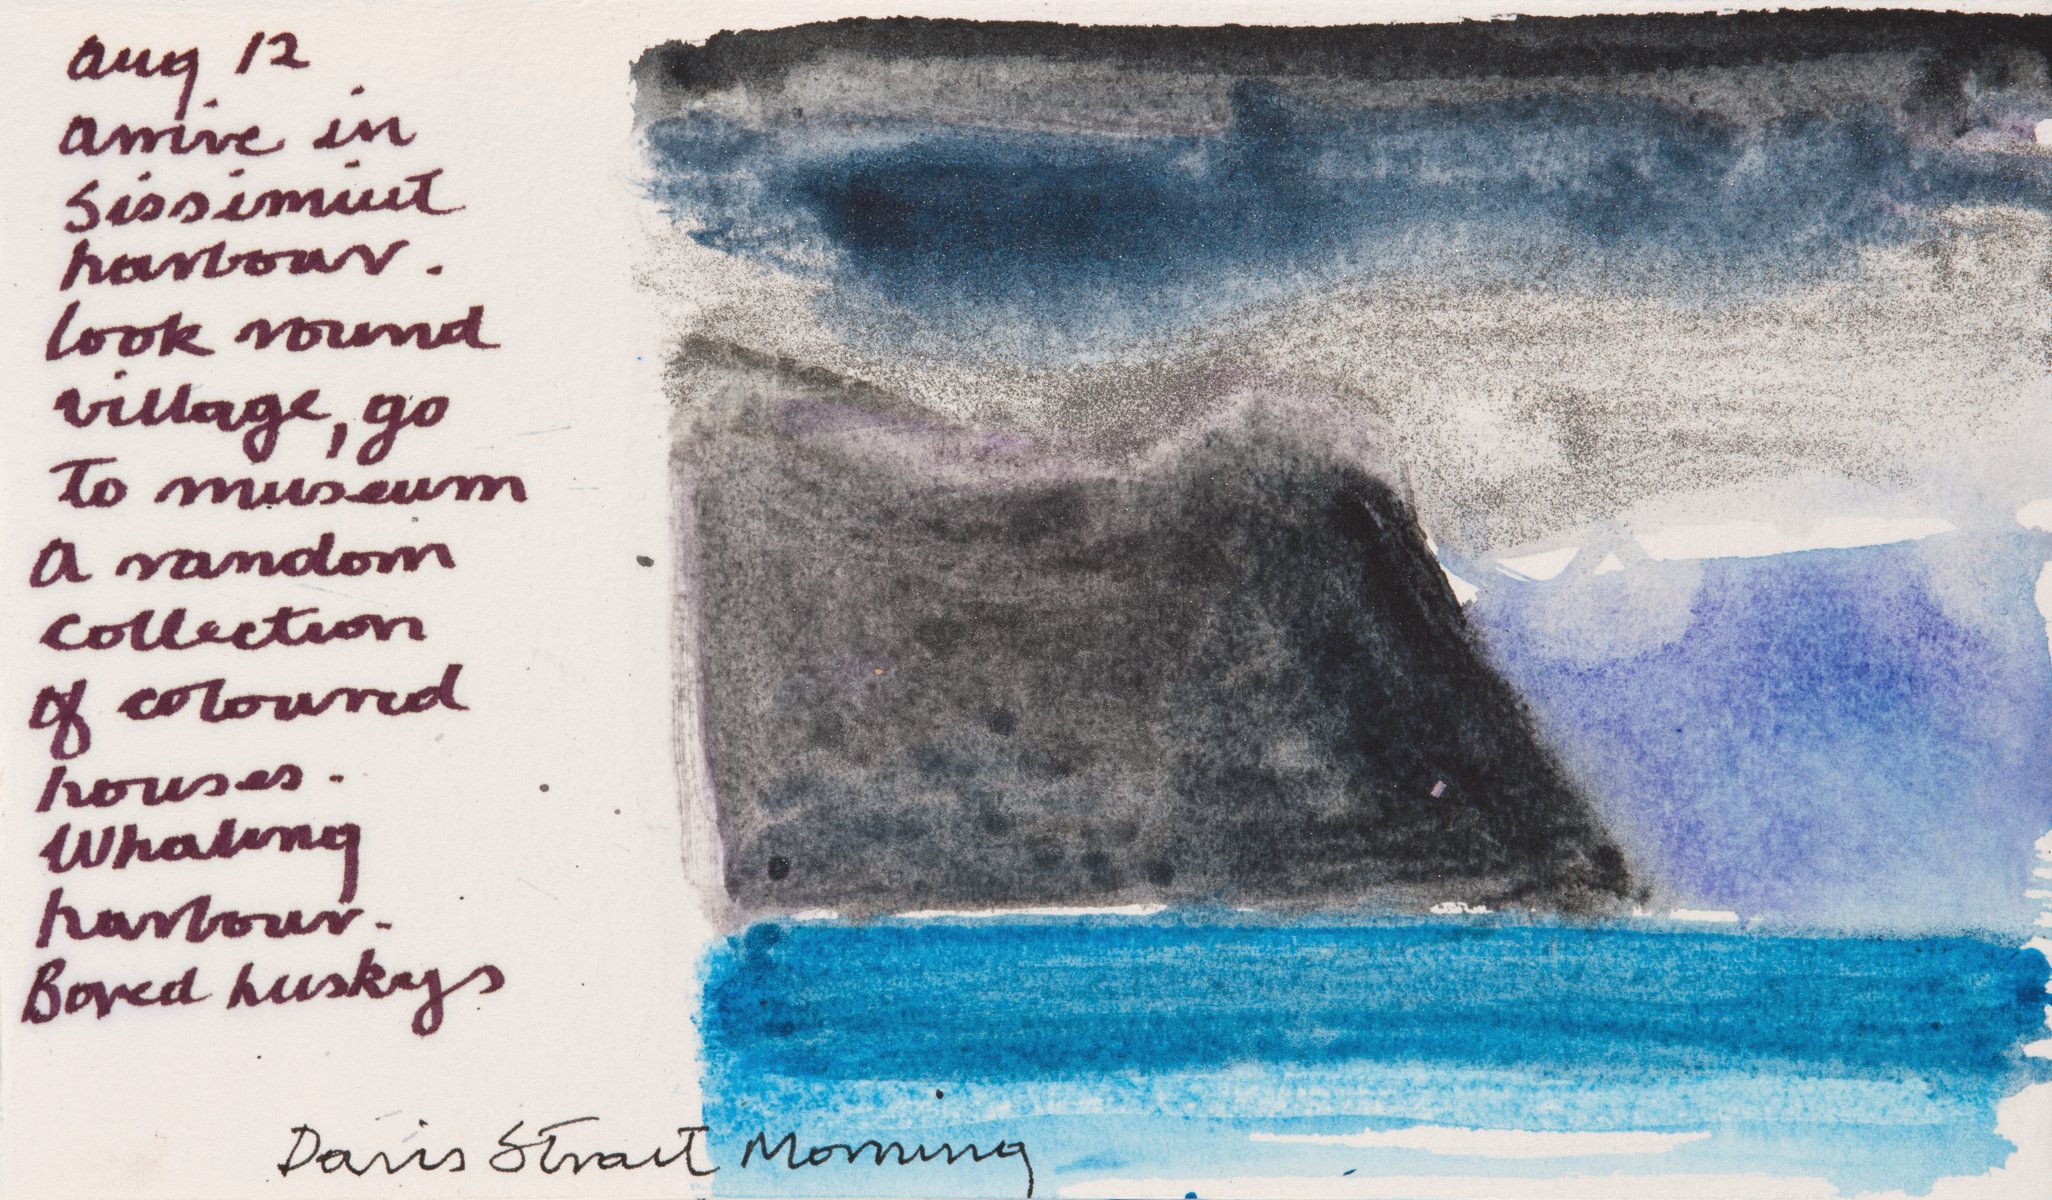 Sketched painting of artic landscape in blue and white, Barbara Rae artic sketchbooks in pale blue font to right